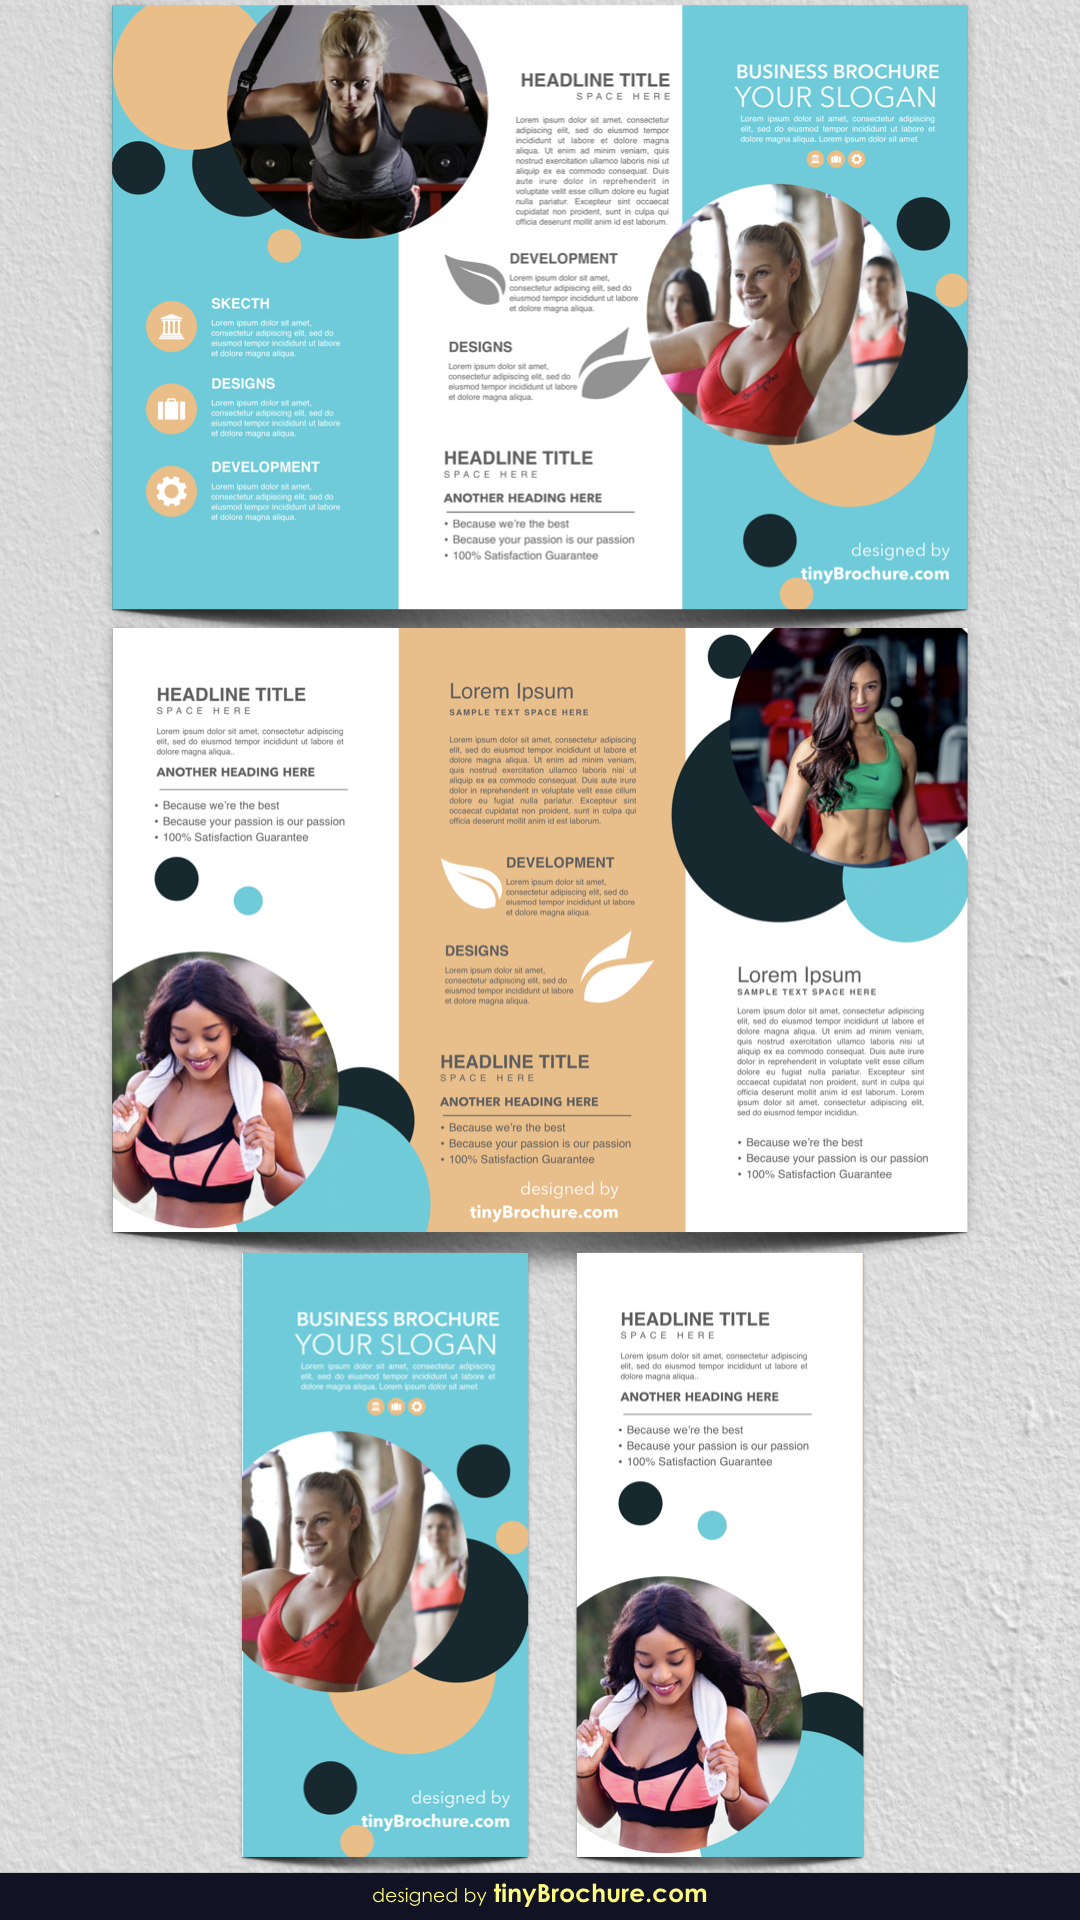 How To Make A Brochure On Microsoft Word 2007 | Design For Booklet Template Microsoft Word 2007